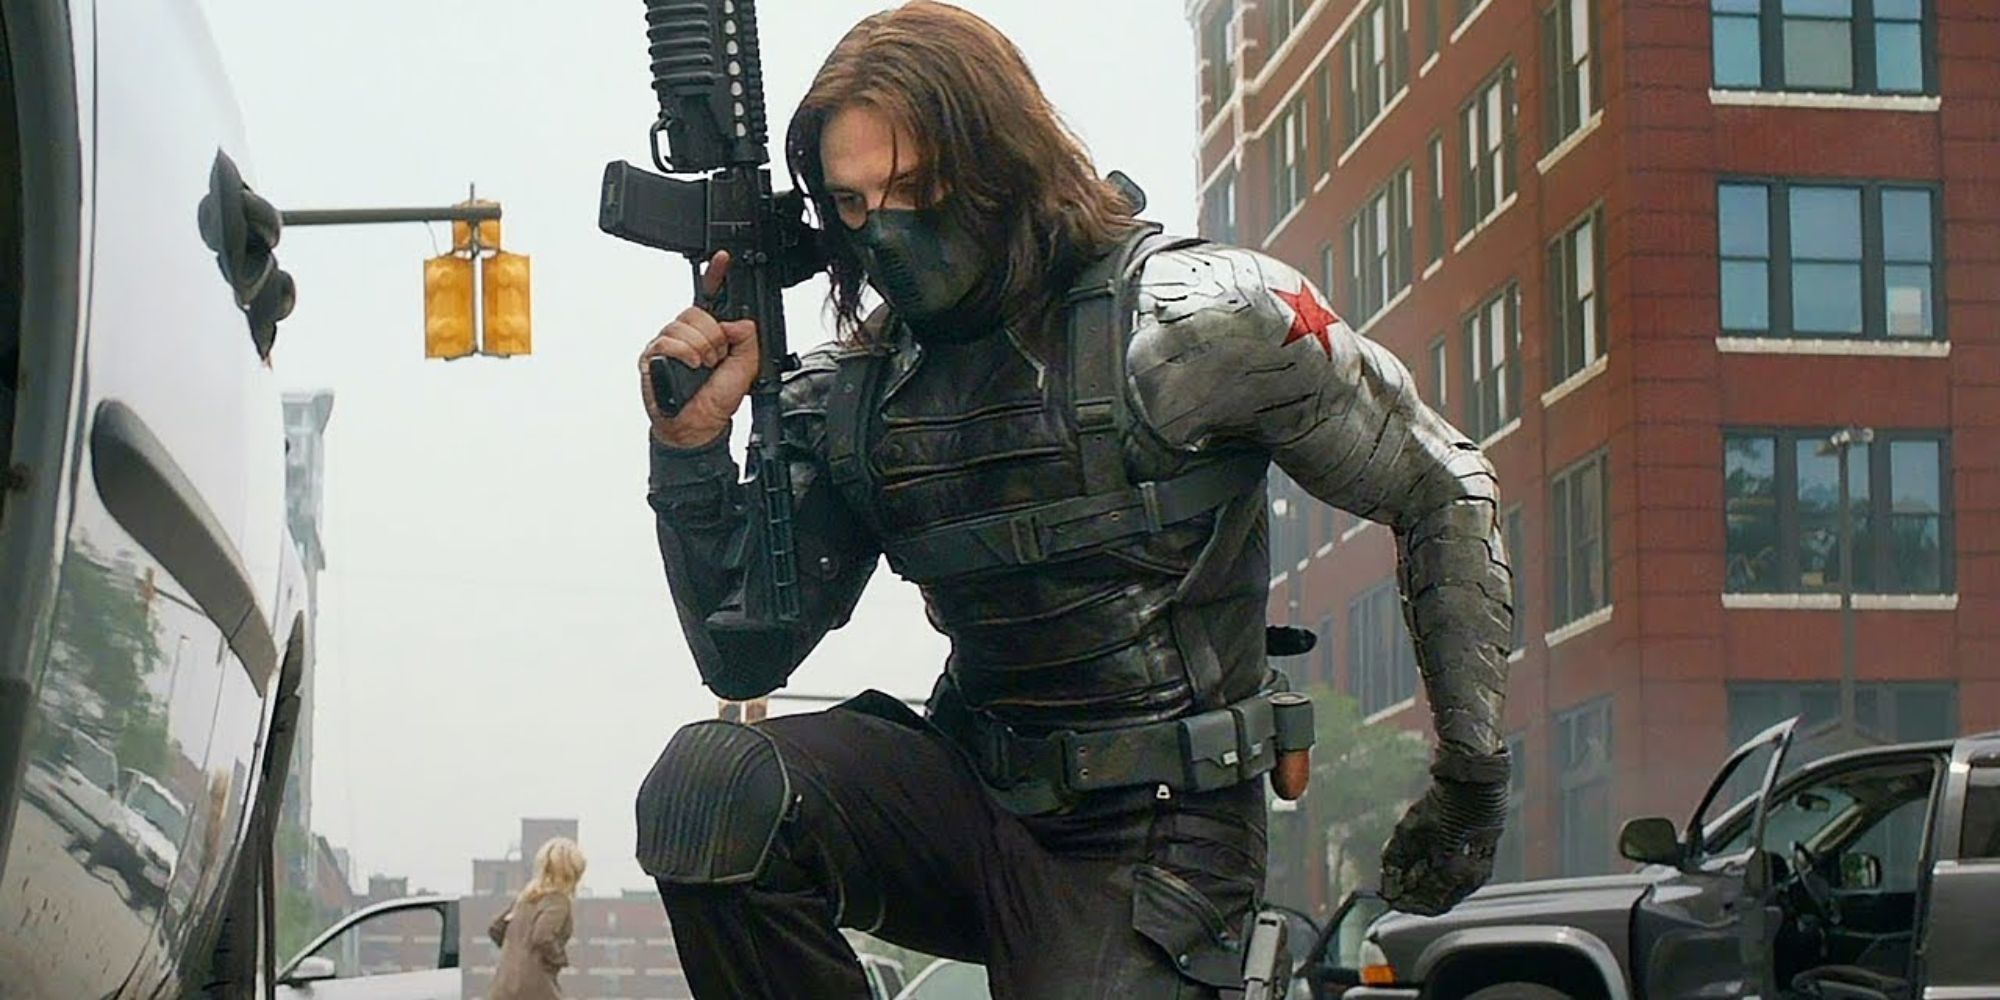 Sebastian Stan kneeling while holding a gun in Captain America: The Winter Soldier